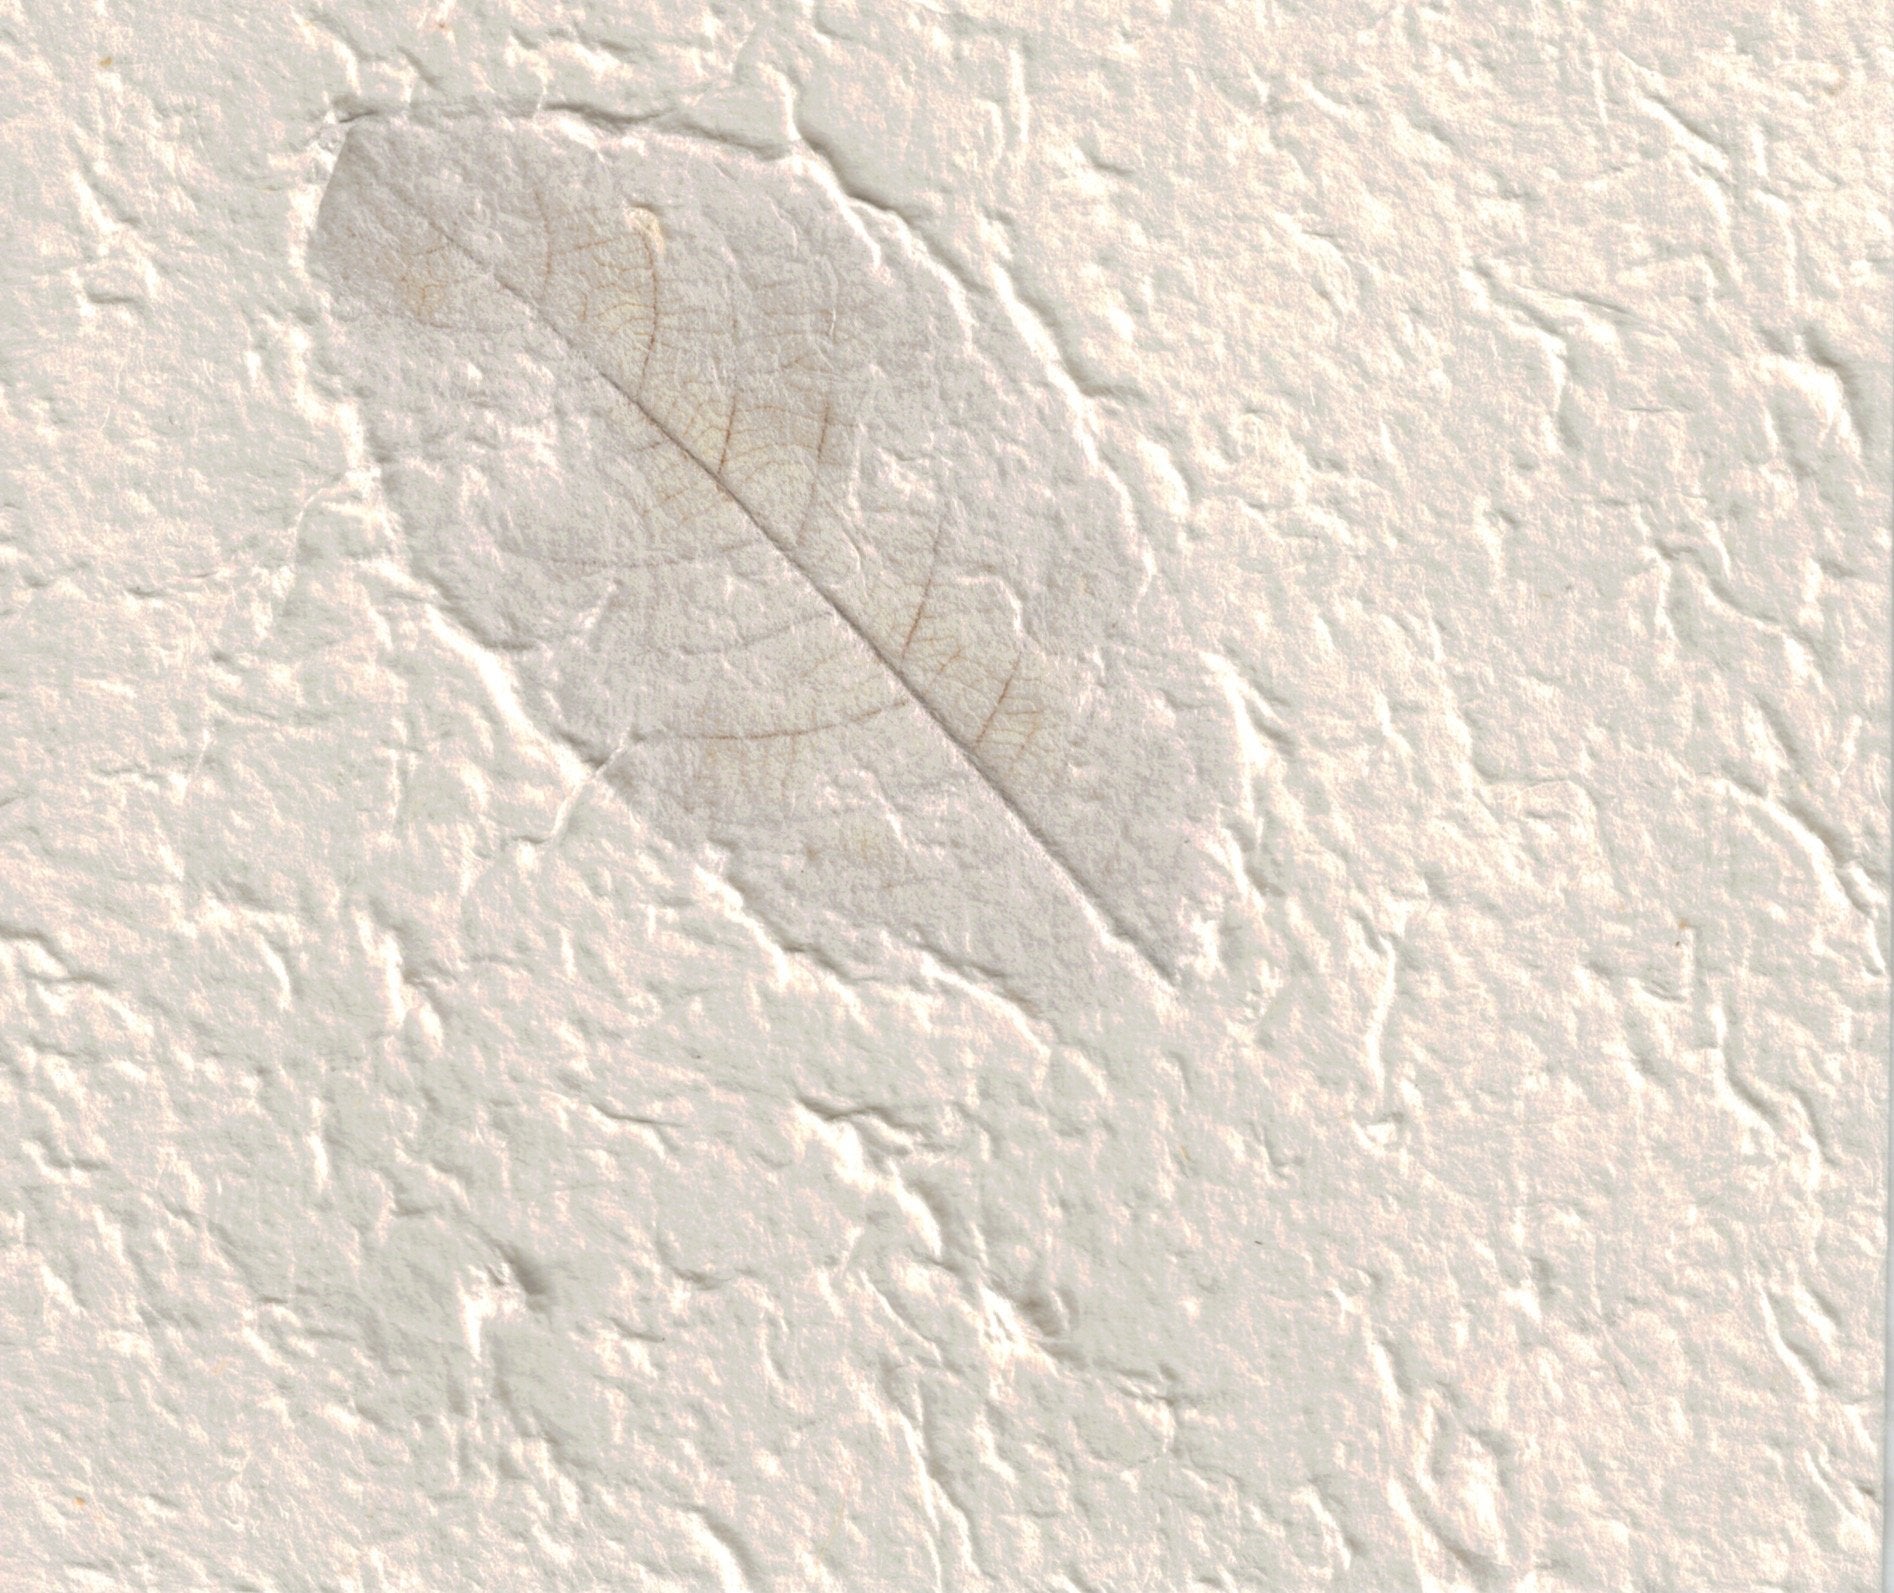 Handmade Paper - White with Leaves